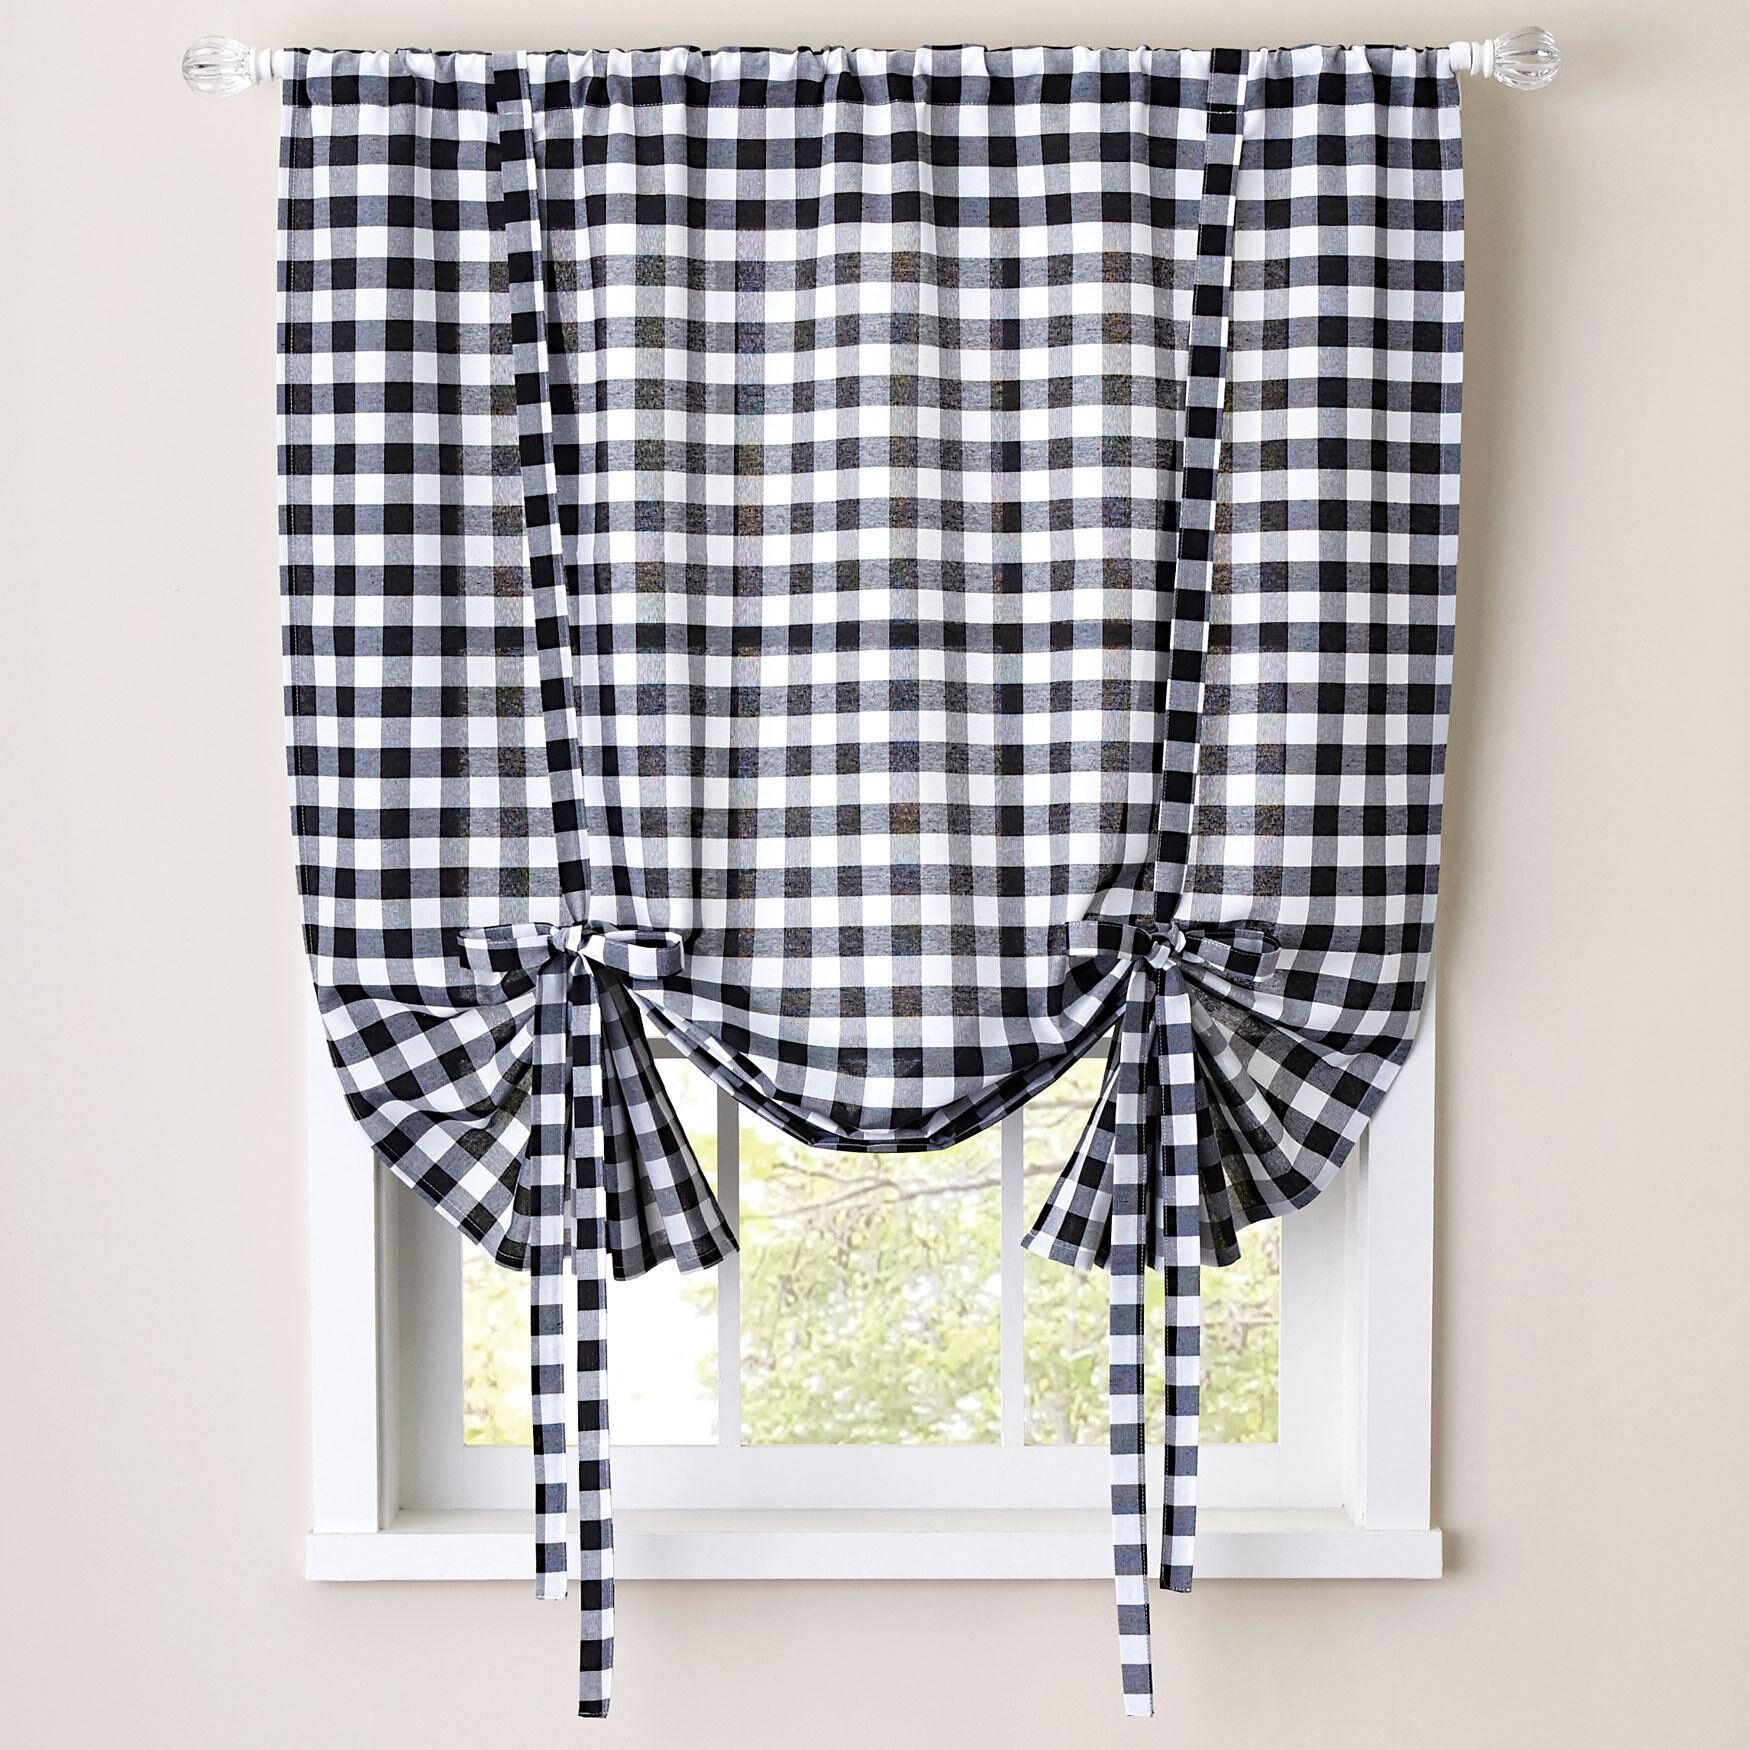 Buffalo Check Decorative Tie Up Shade For Burgundy Cotton Blend Classic Checkered Decorative Window Curtains (View 7 of 20)